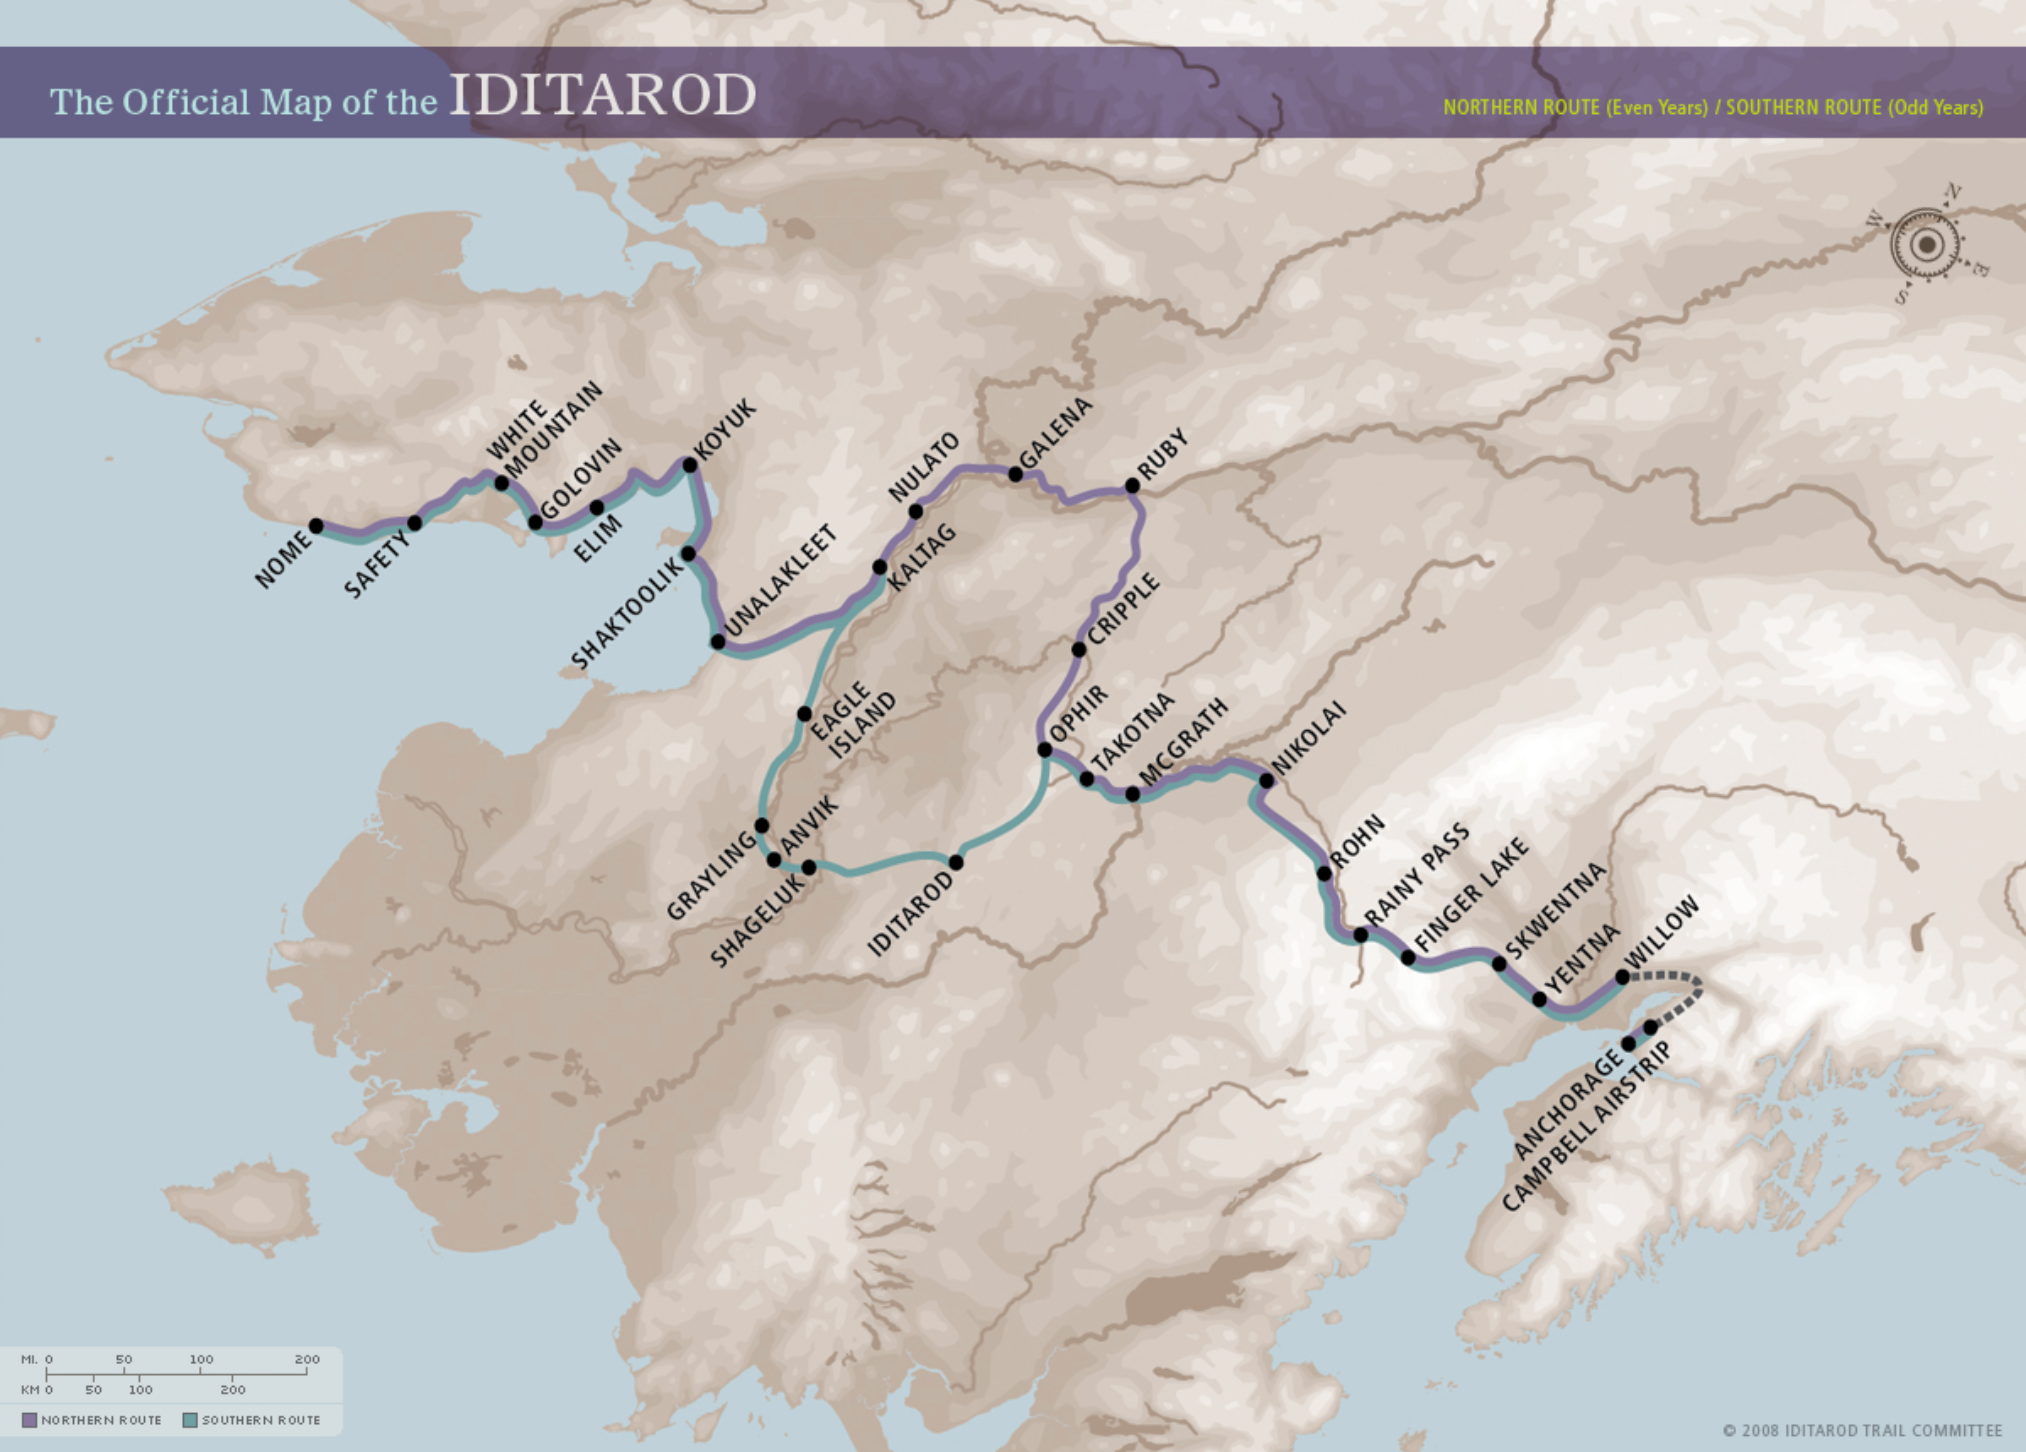 The typical Iditarod route which alternates between a northern and southern route each year